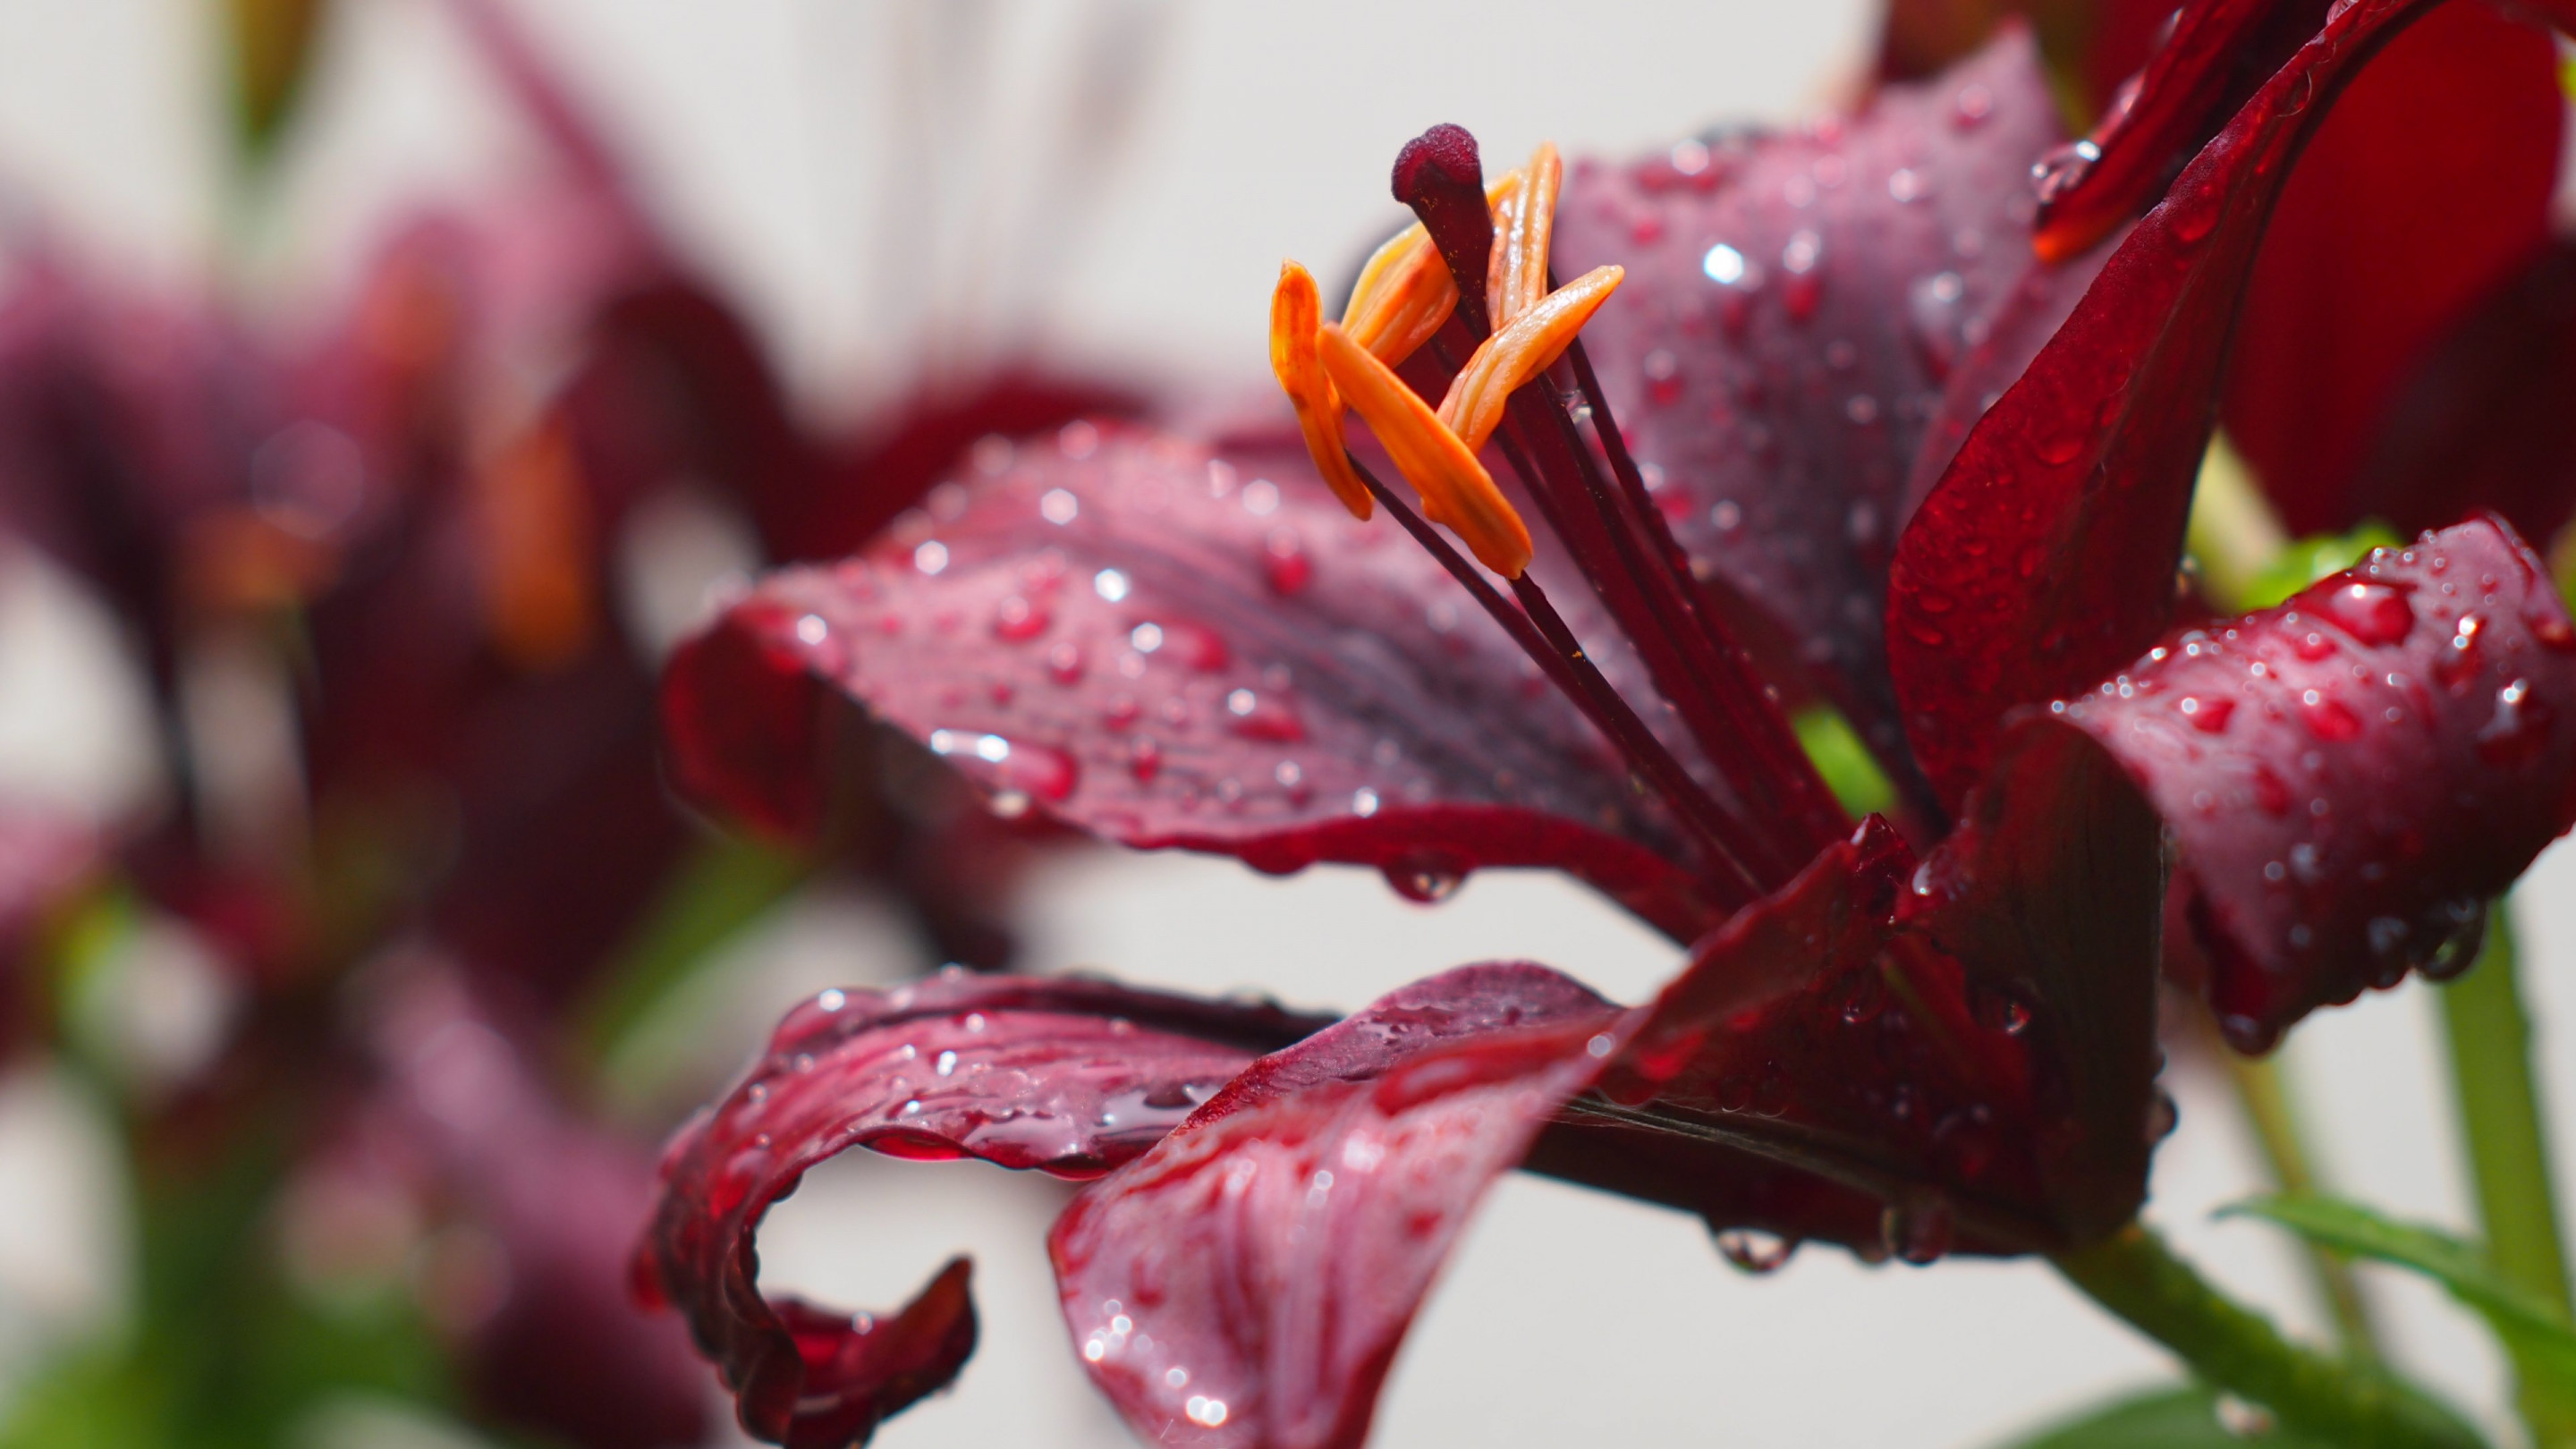 Lily flower and water drops wallpaper 2880x1620